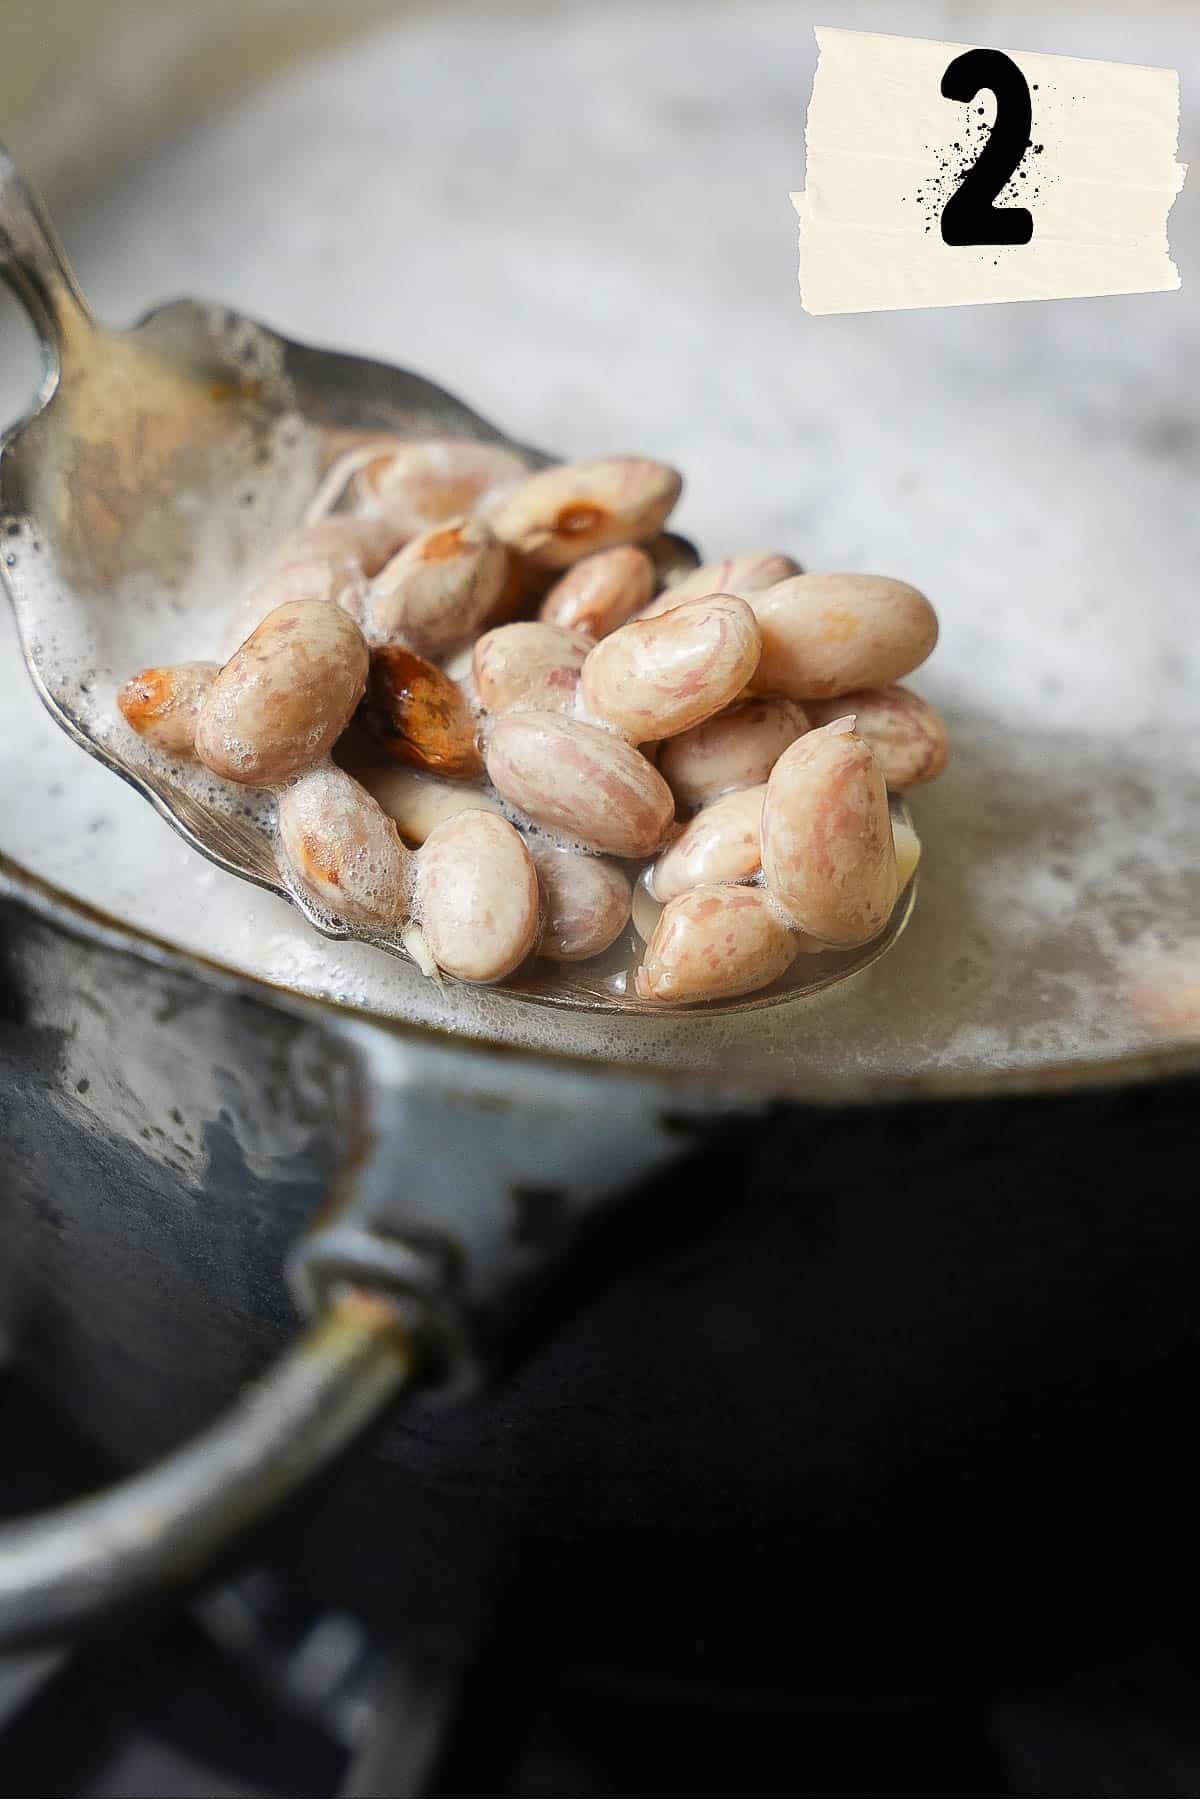 Cooking borlotti beans in a pot on a stove.